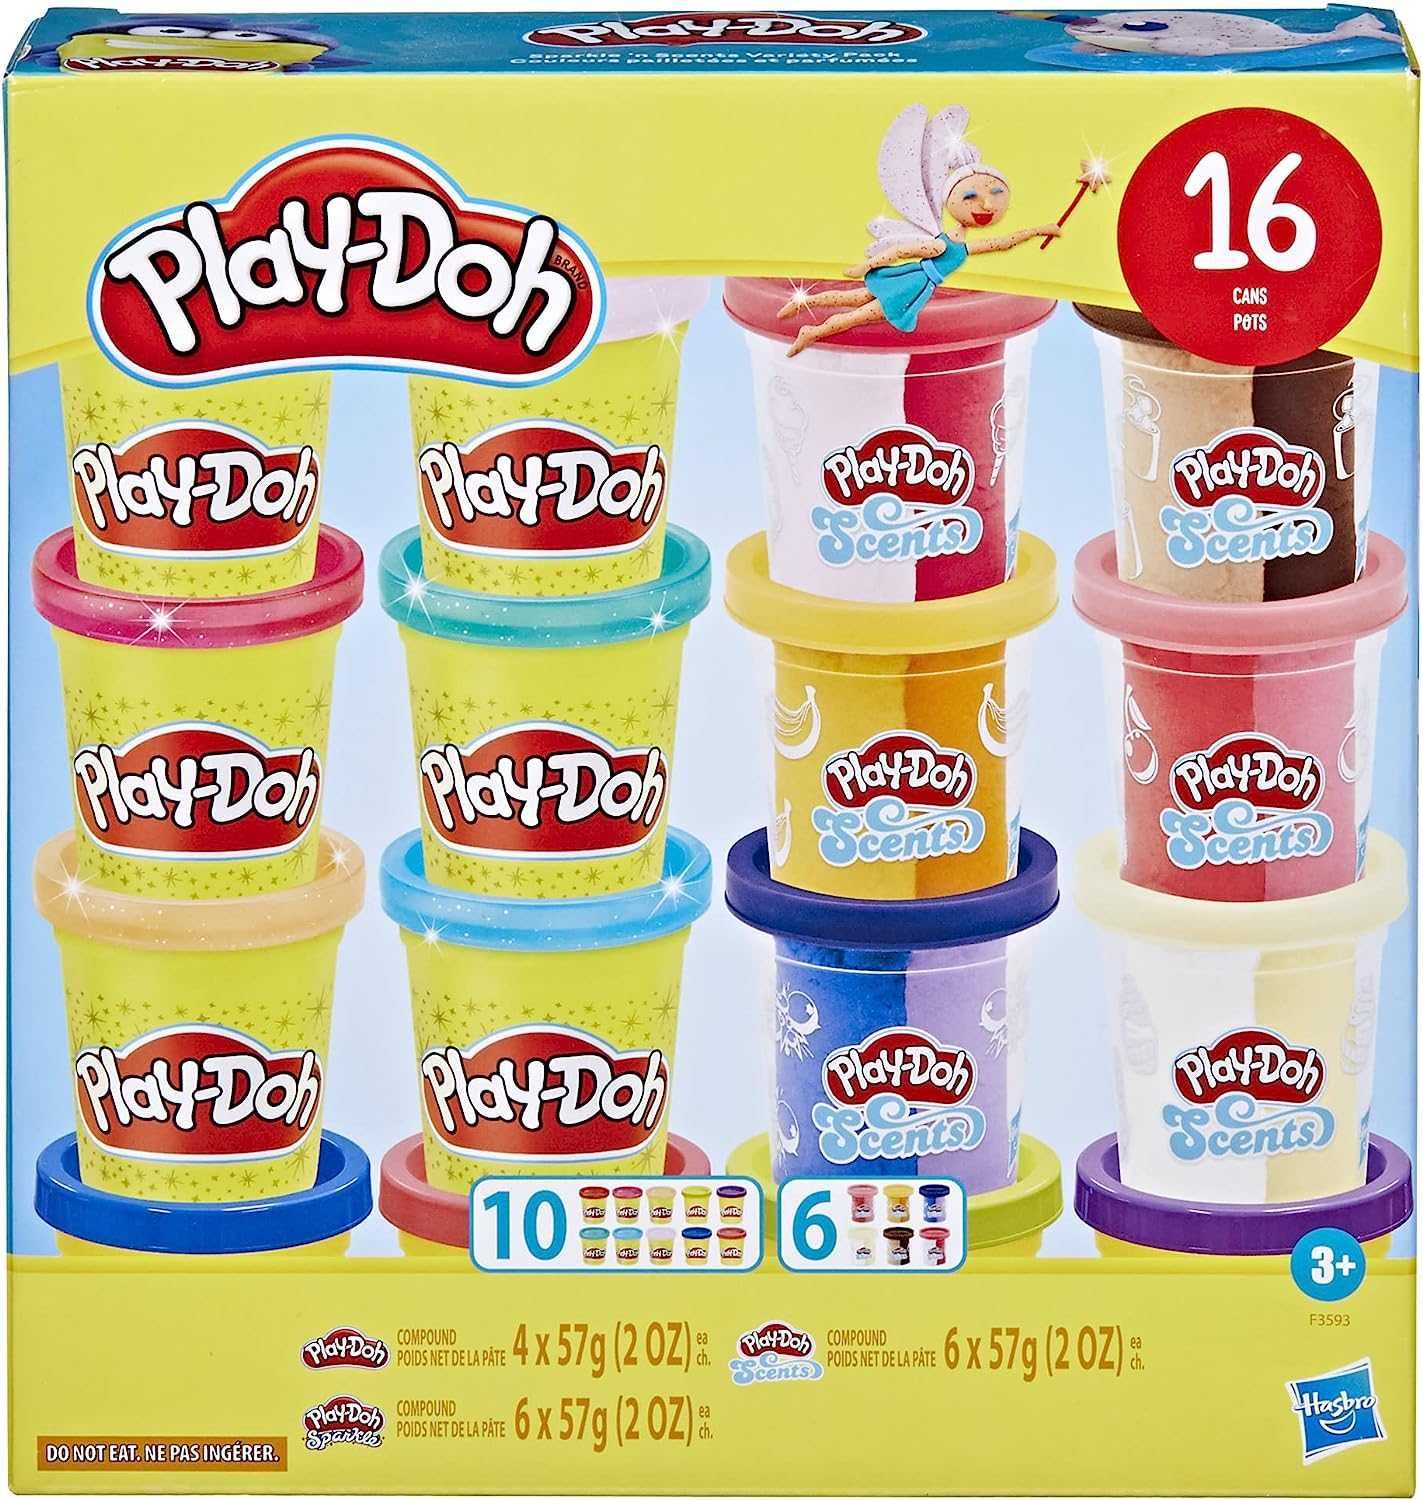 Play-Doh Sparkle and Scents Variety 16 банок